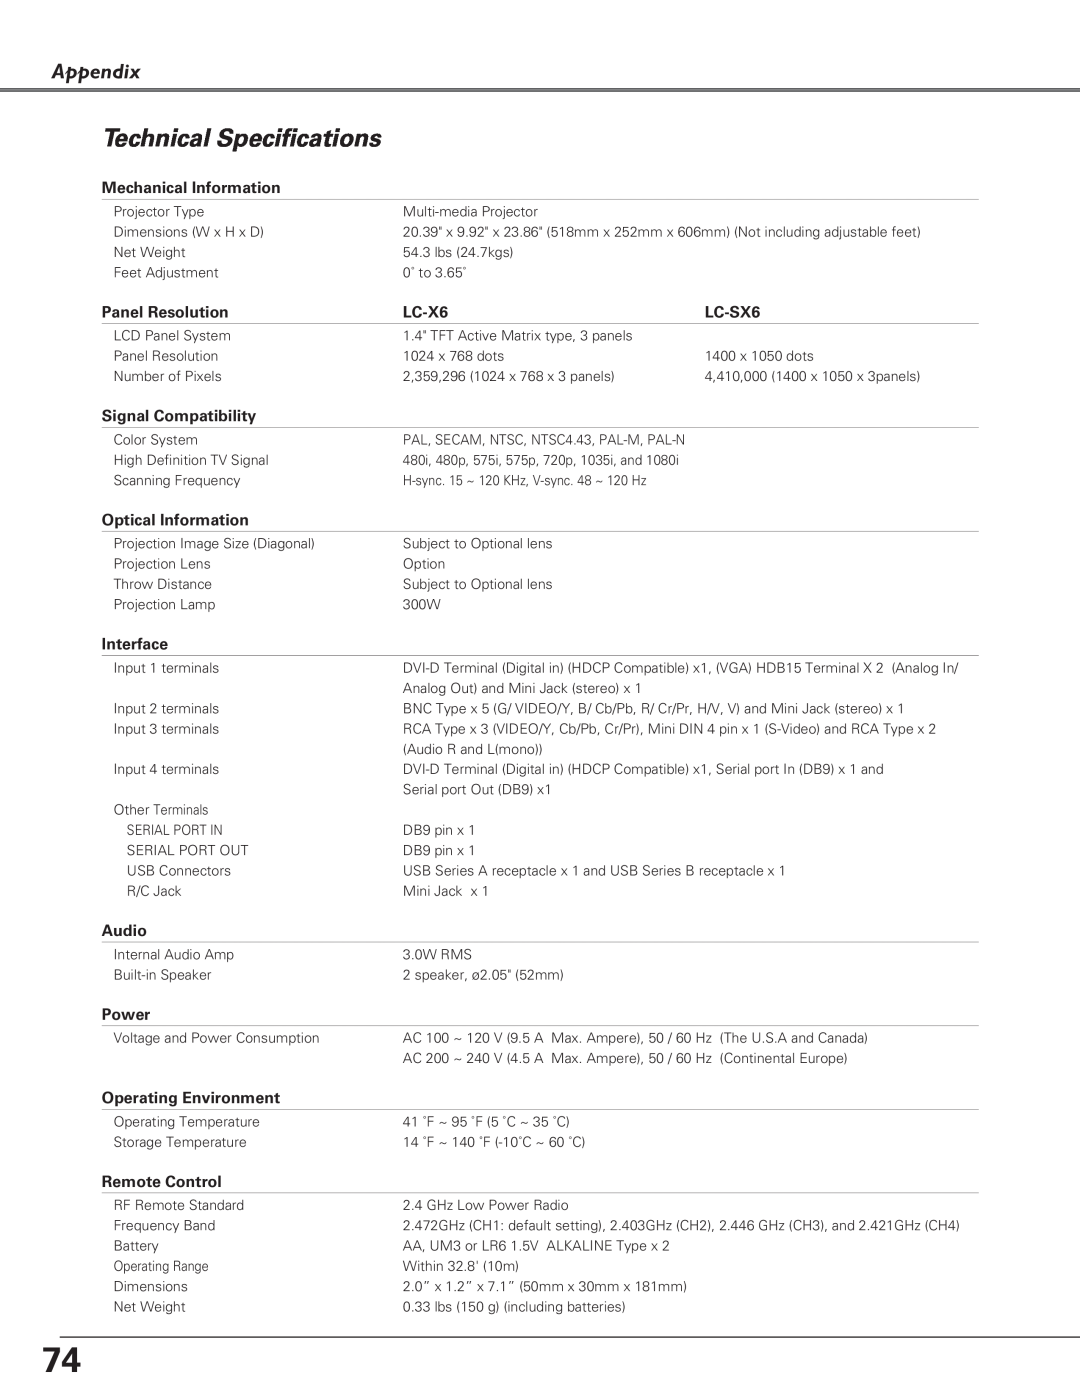 Eiki LC-X6, LC-SX6 owner manual Technical Specifications, Appendix 